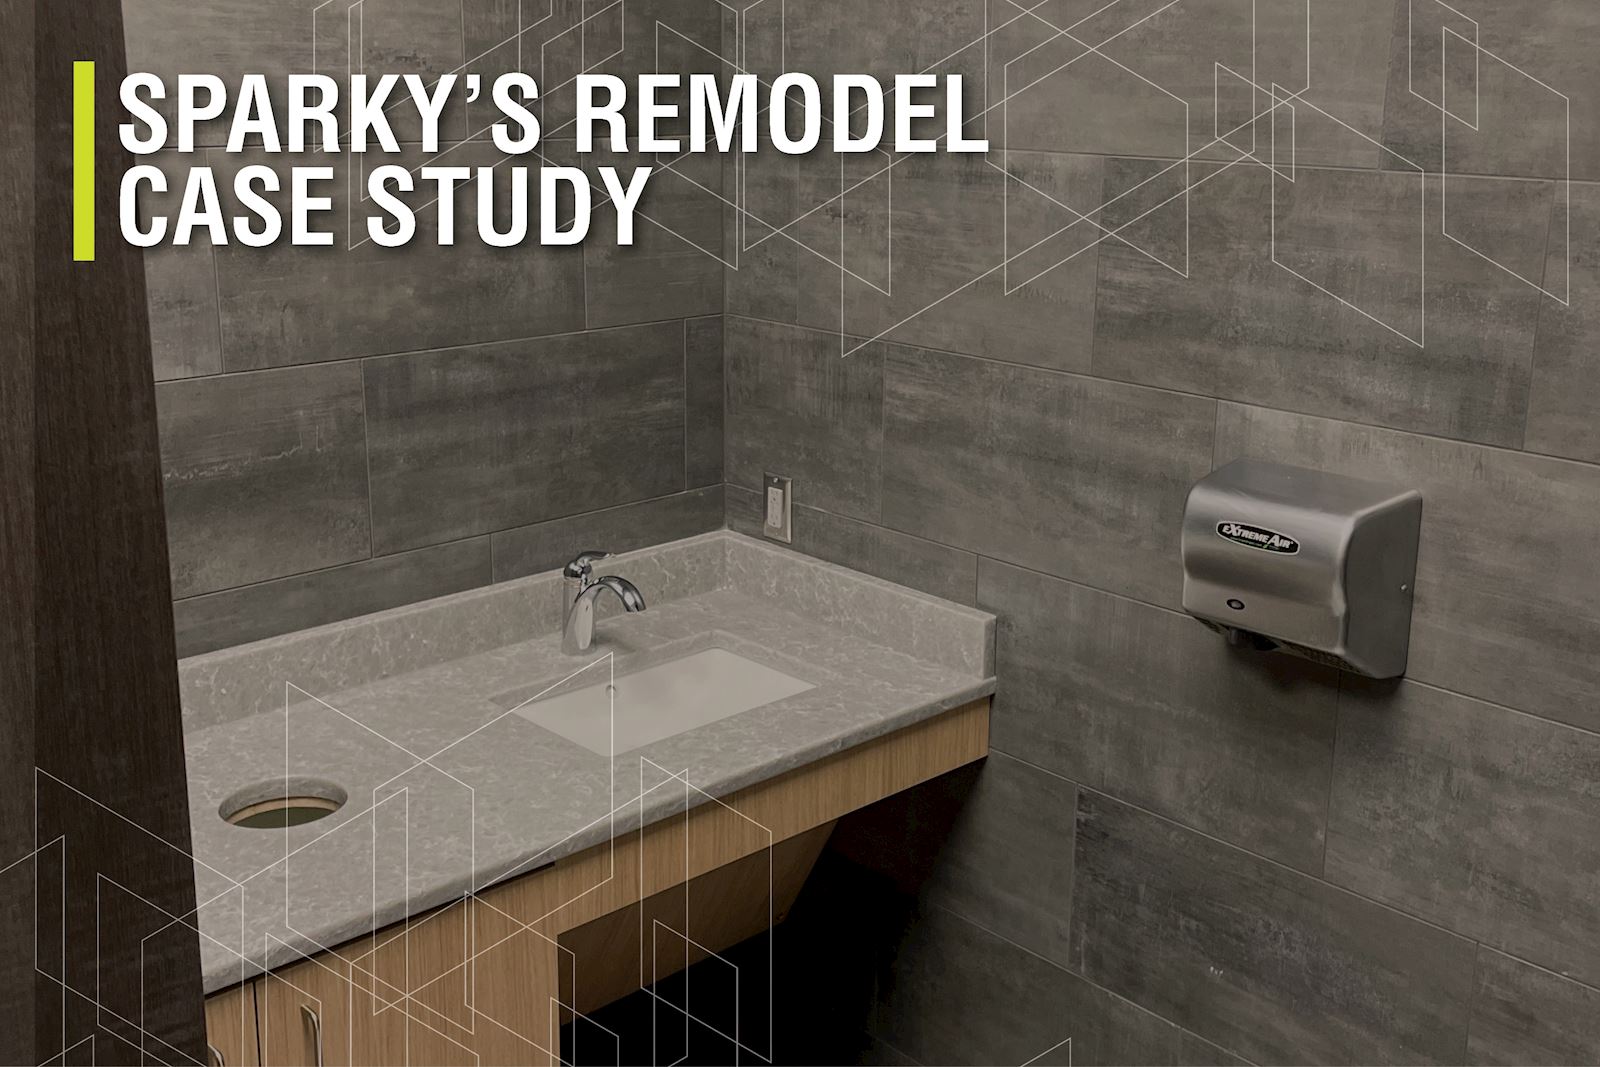 Sparky's Remodel Case Study